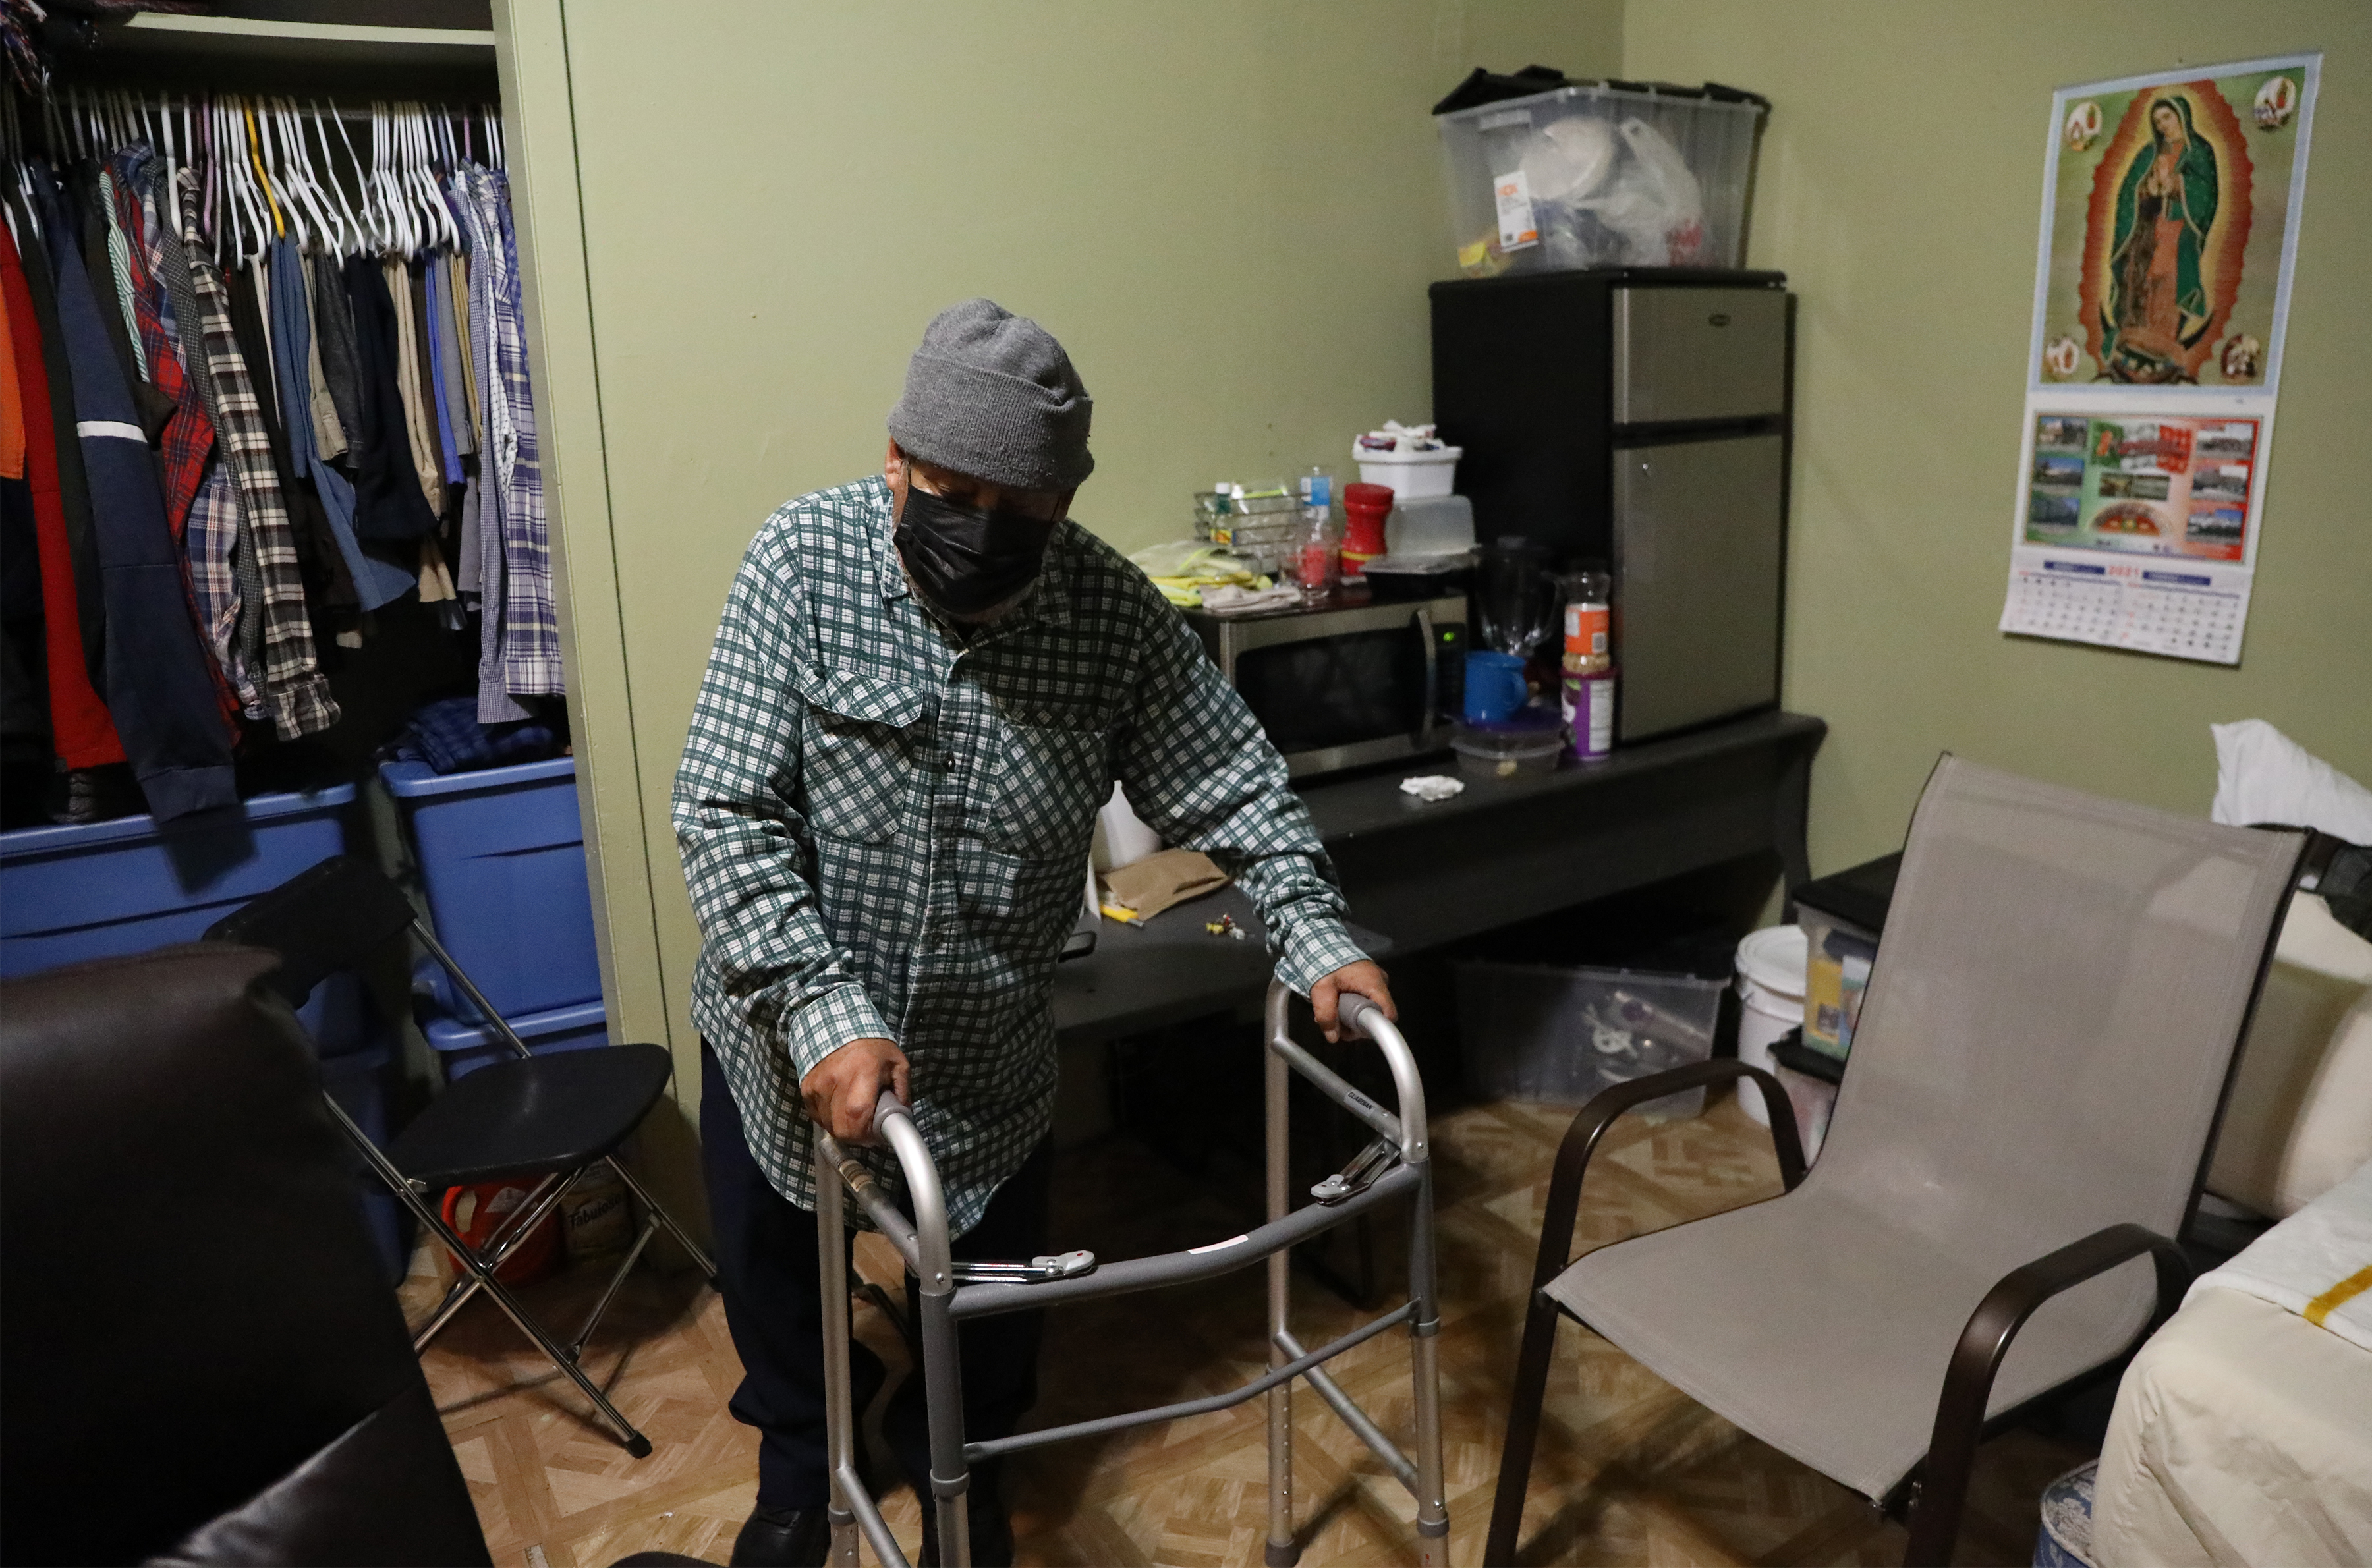 An elderly man stands with a walker in a small apartment with a few chairs, a microwave and mini-fridge, and a closet full of clothes behind him.